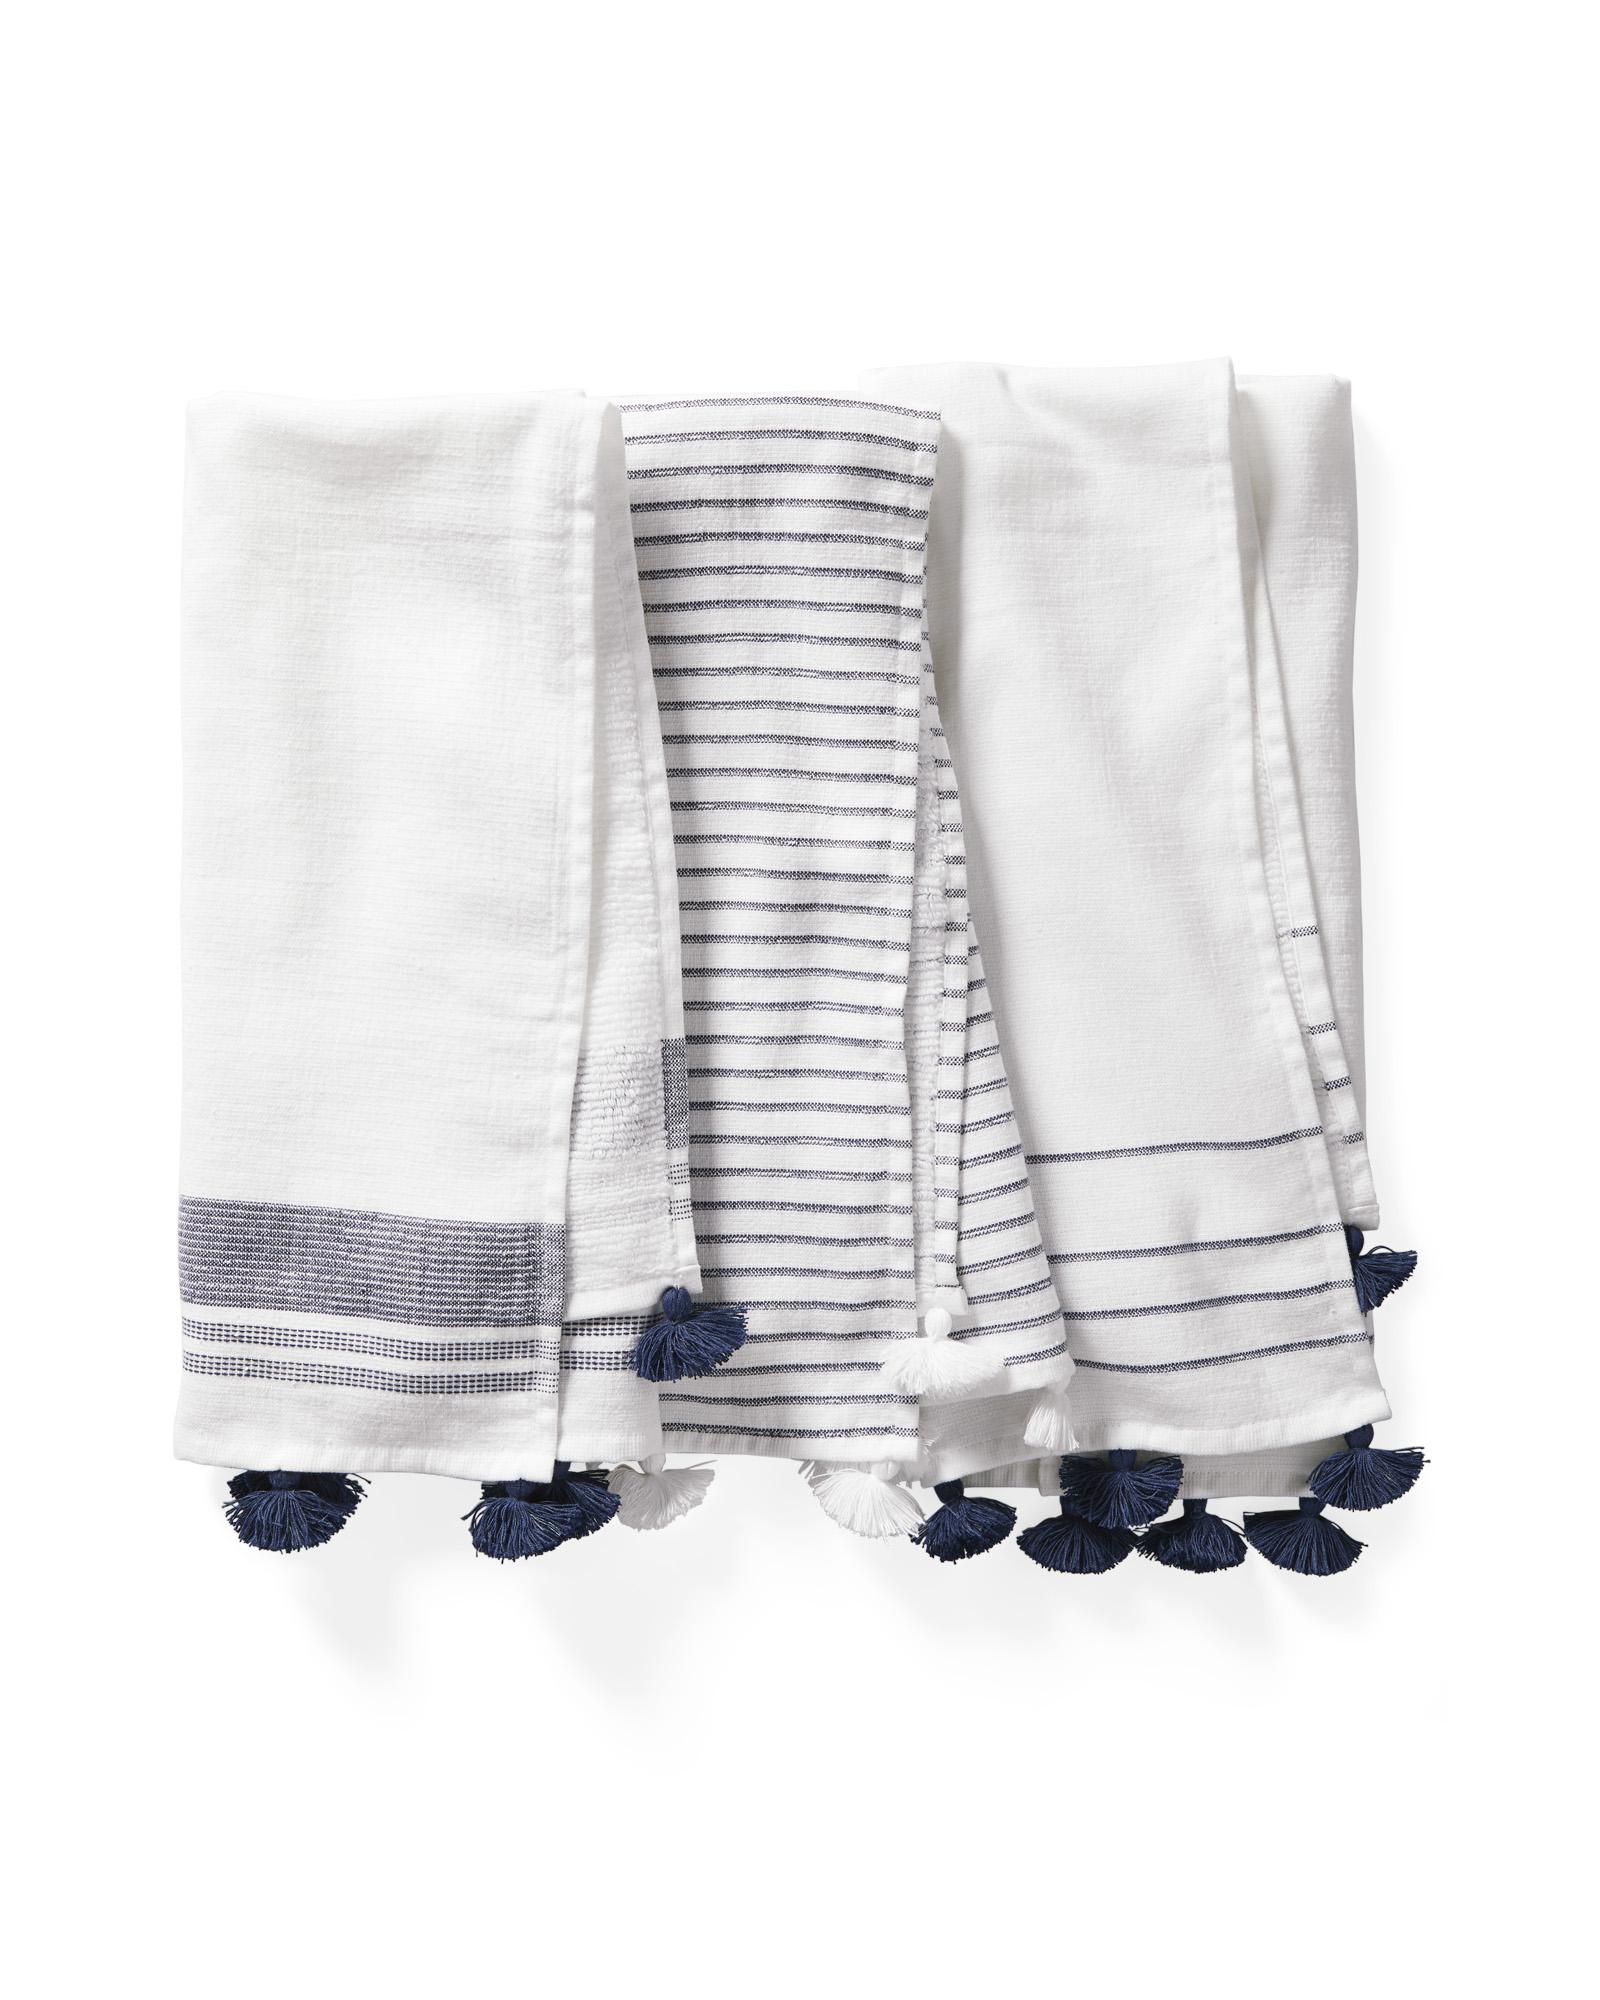 Dish Towels-Yellow Stripe  Blue Room Gallery and Gift Shop